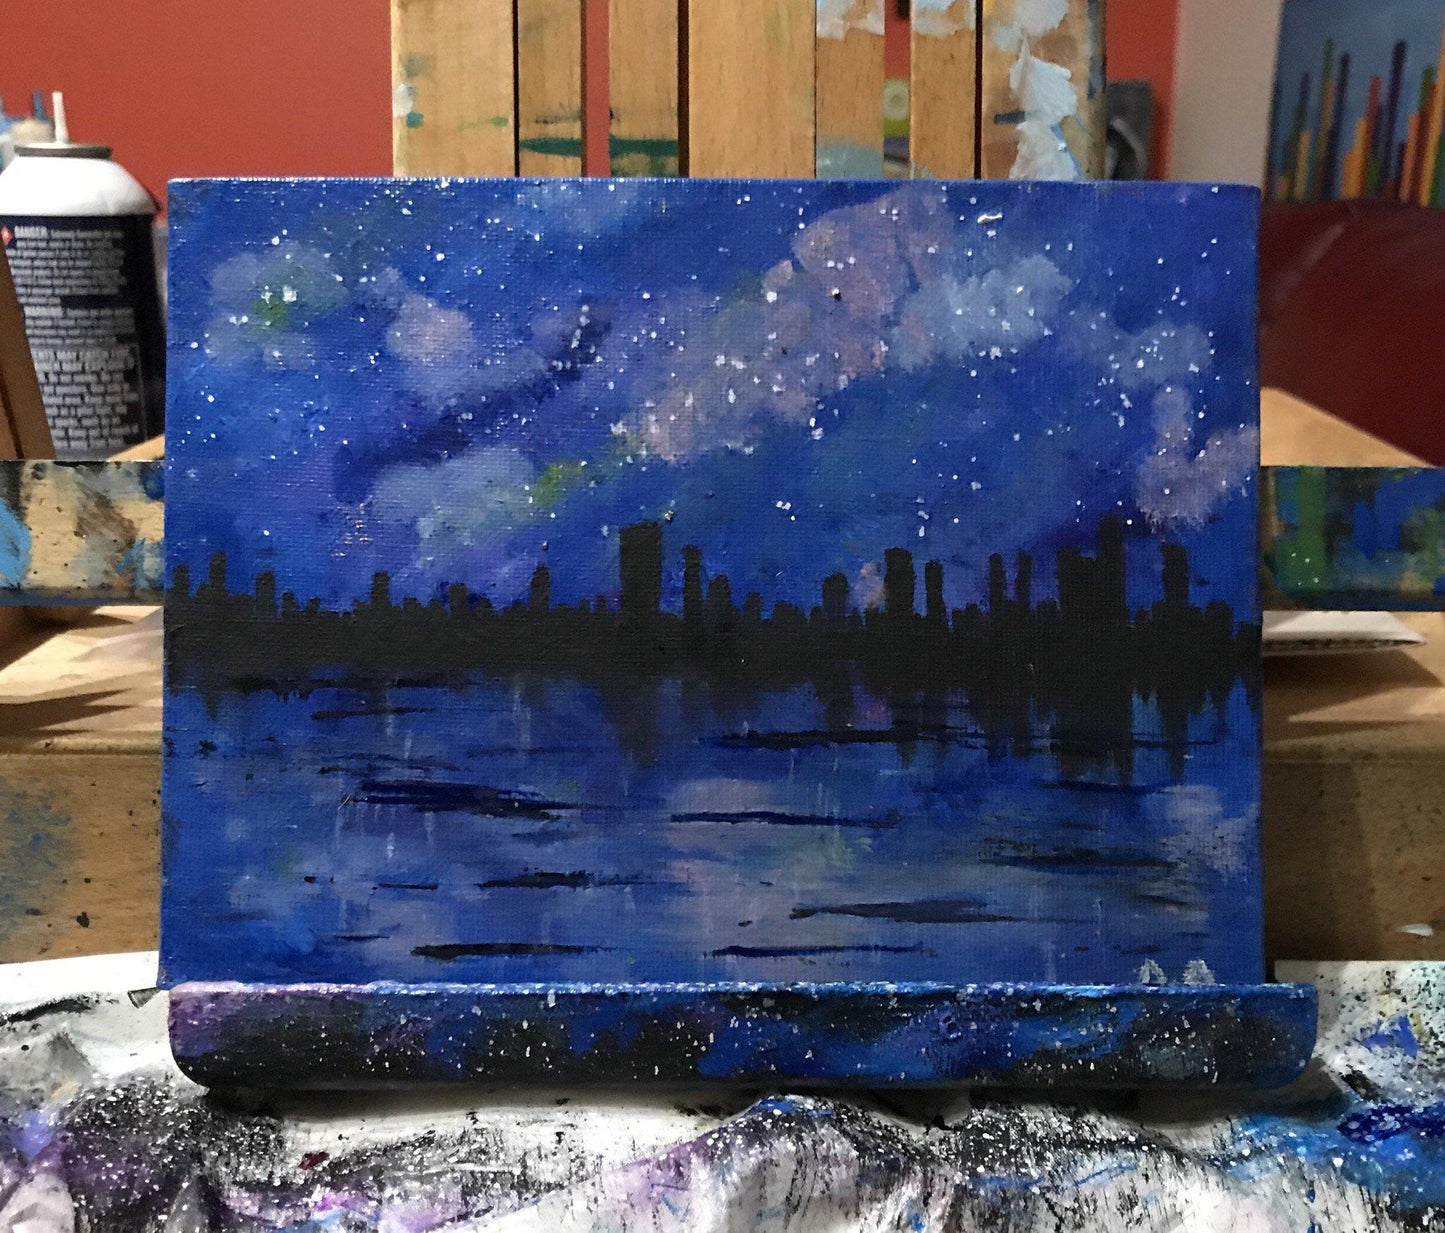 Original oil paintings of city skyline over a lake/river on a starry night